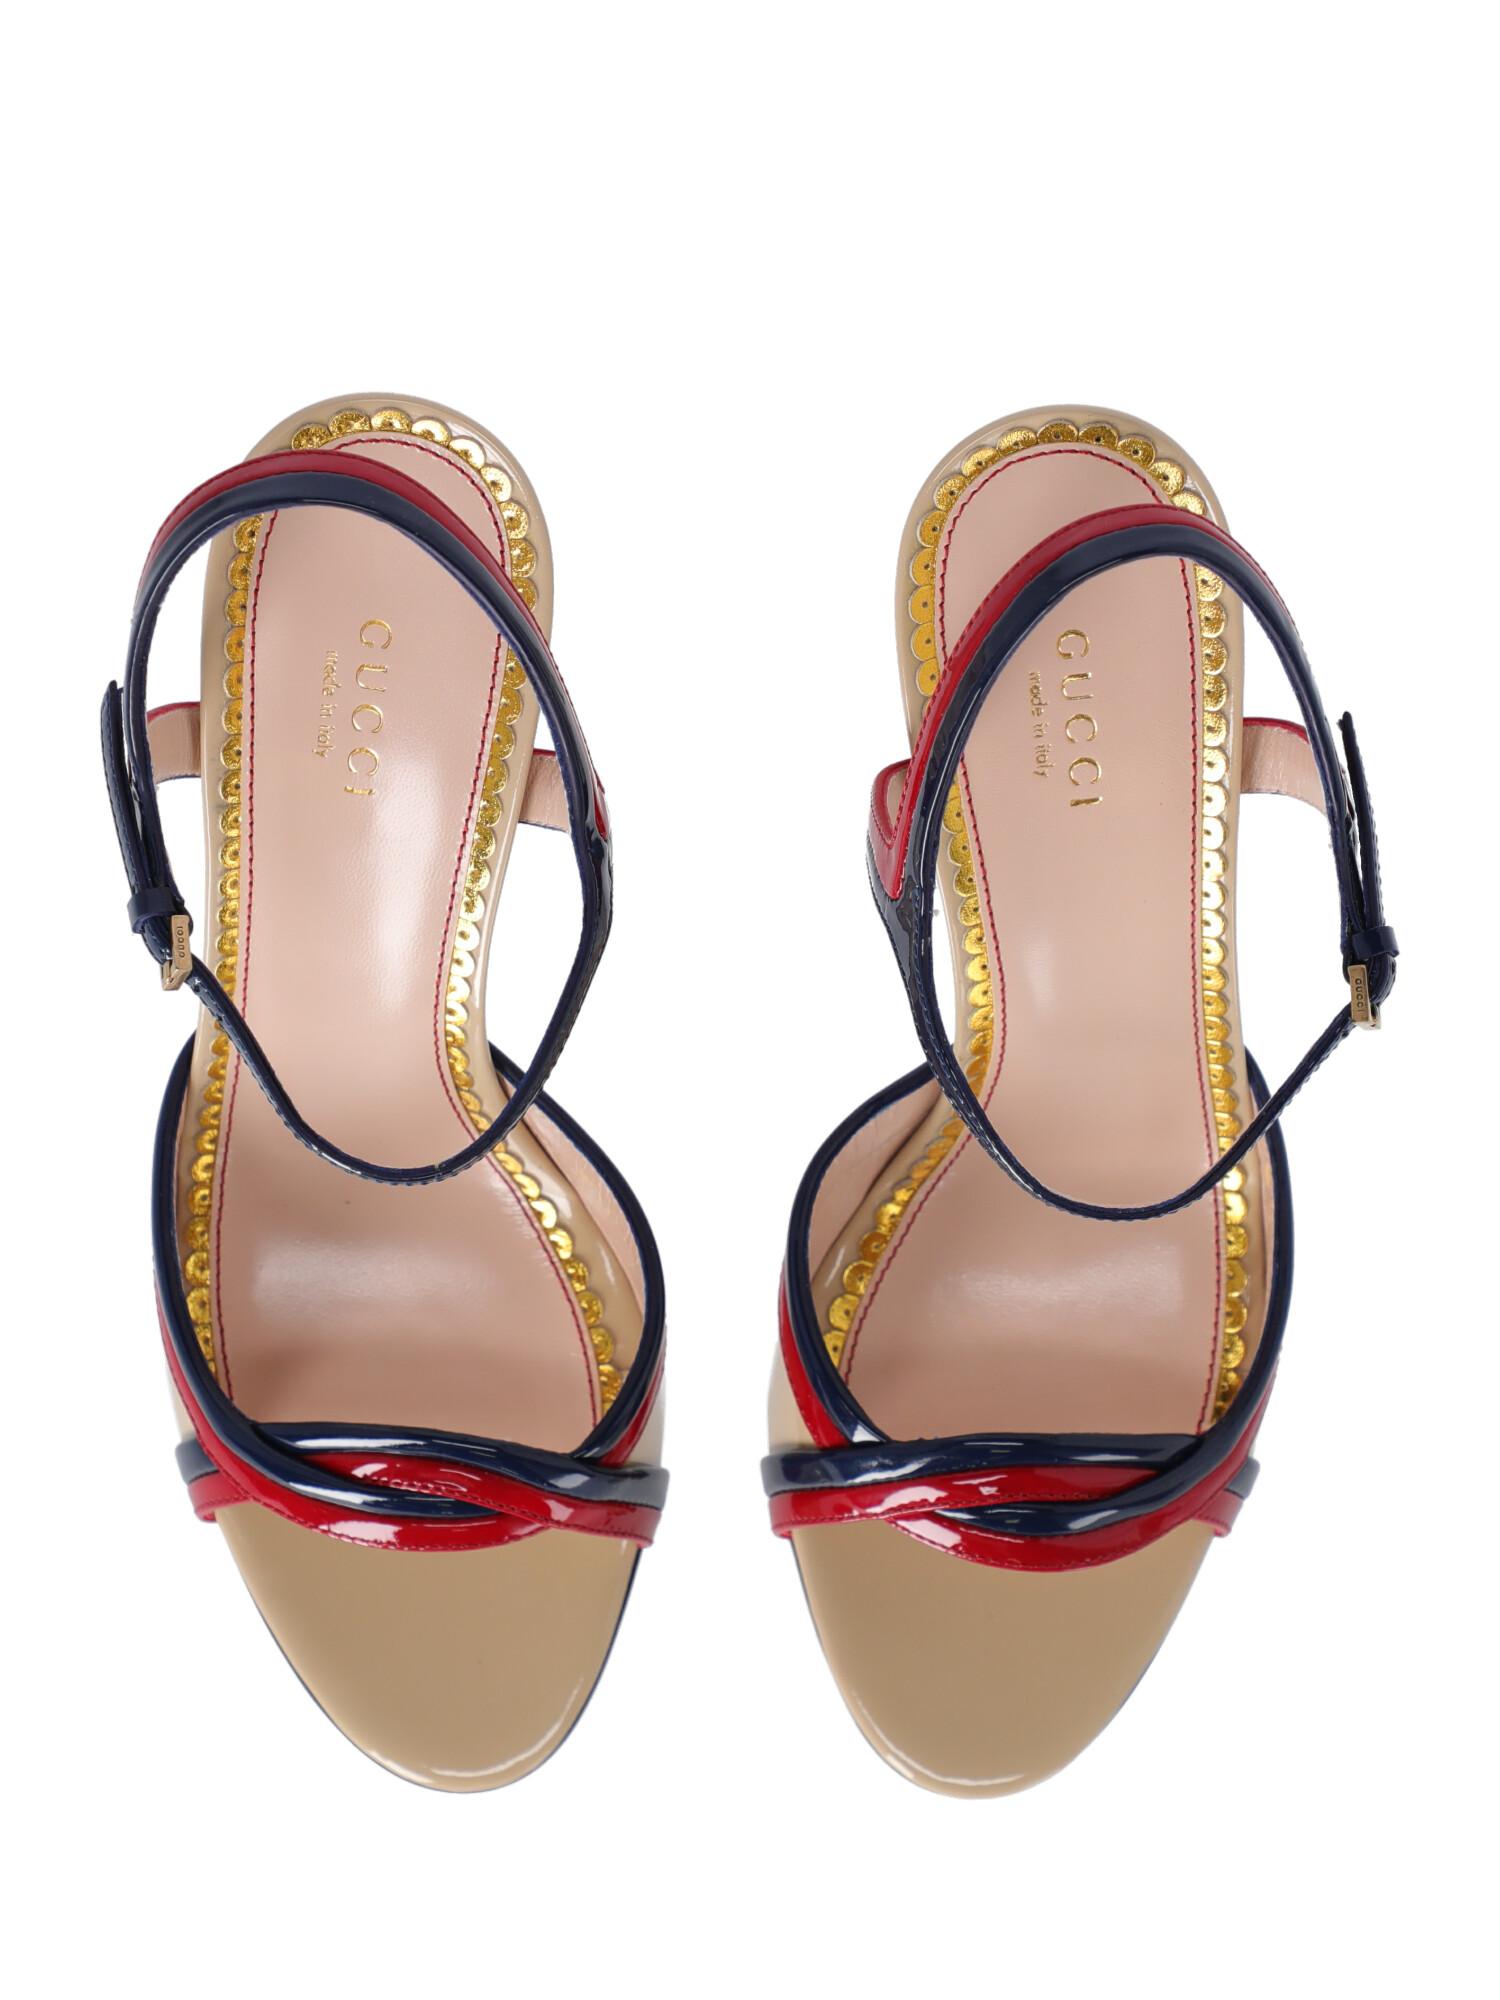 Gucci Women's Sandals Beige/Navy/Red Leather IT 39 For Sale 3